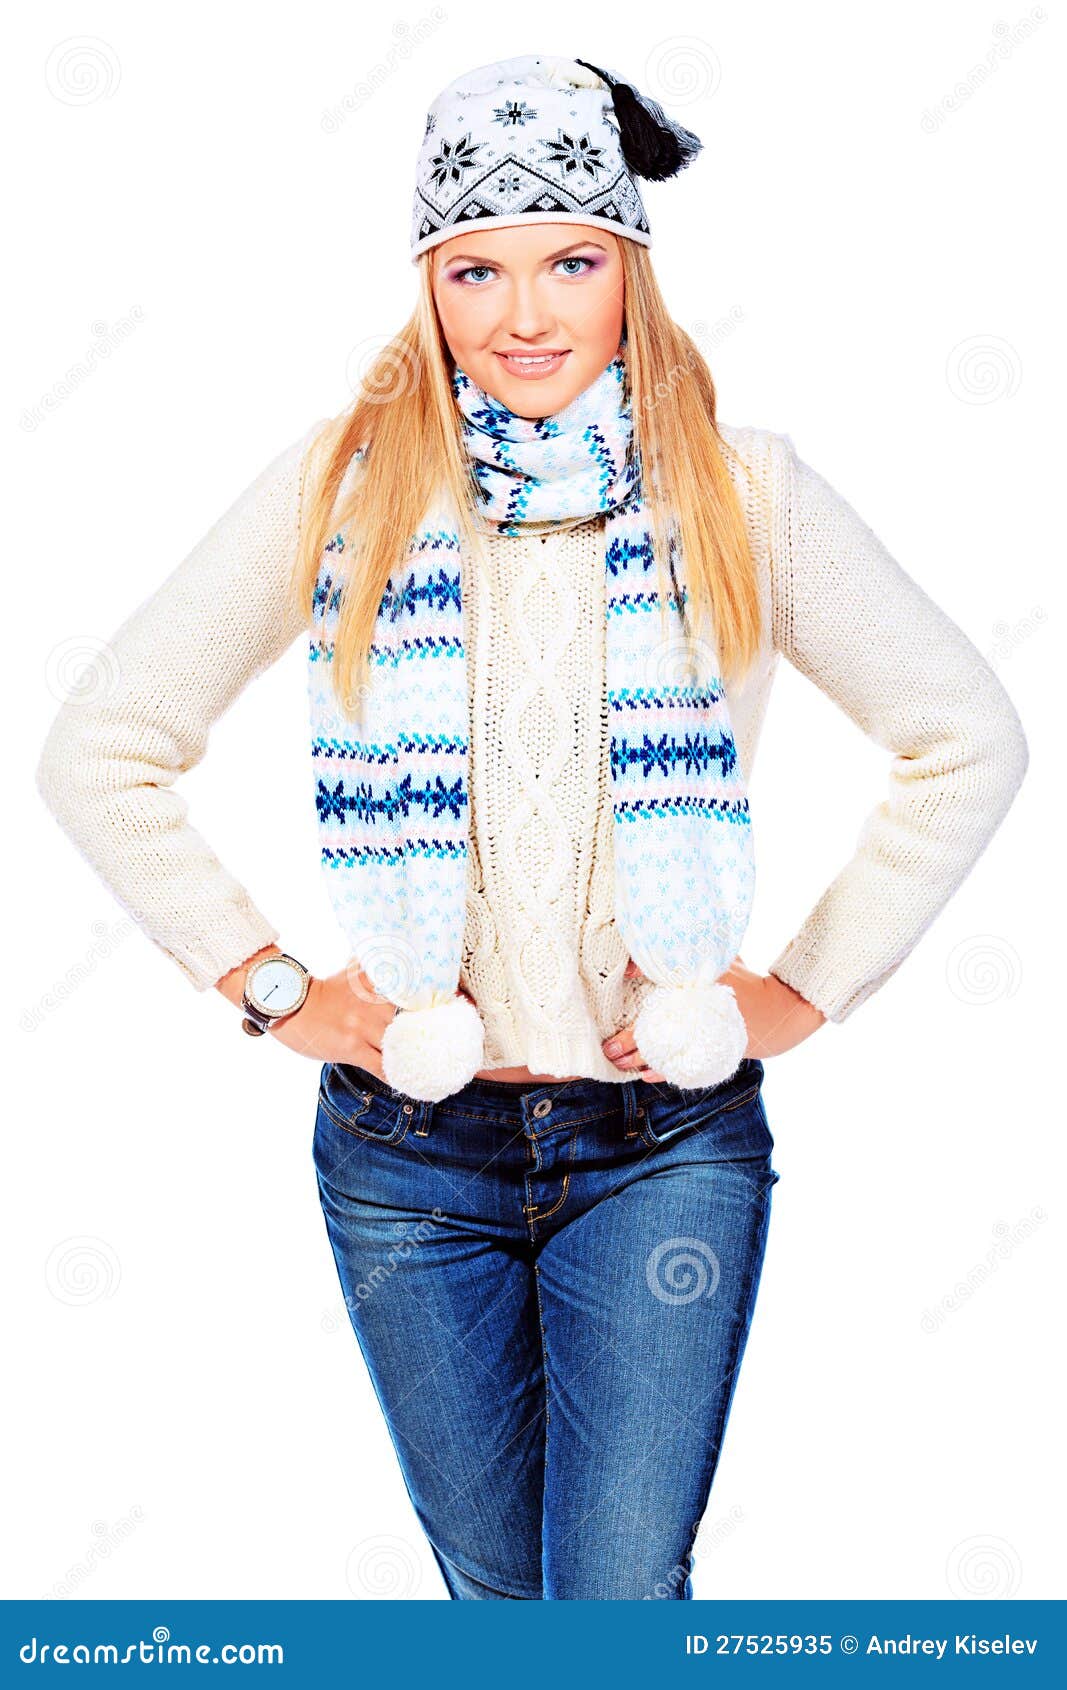 Scarf and hat stock image. Image of pretty, emotional - 27525935